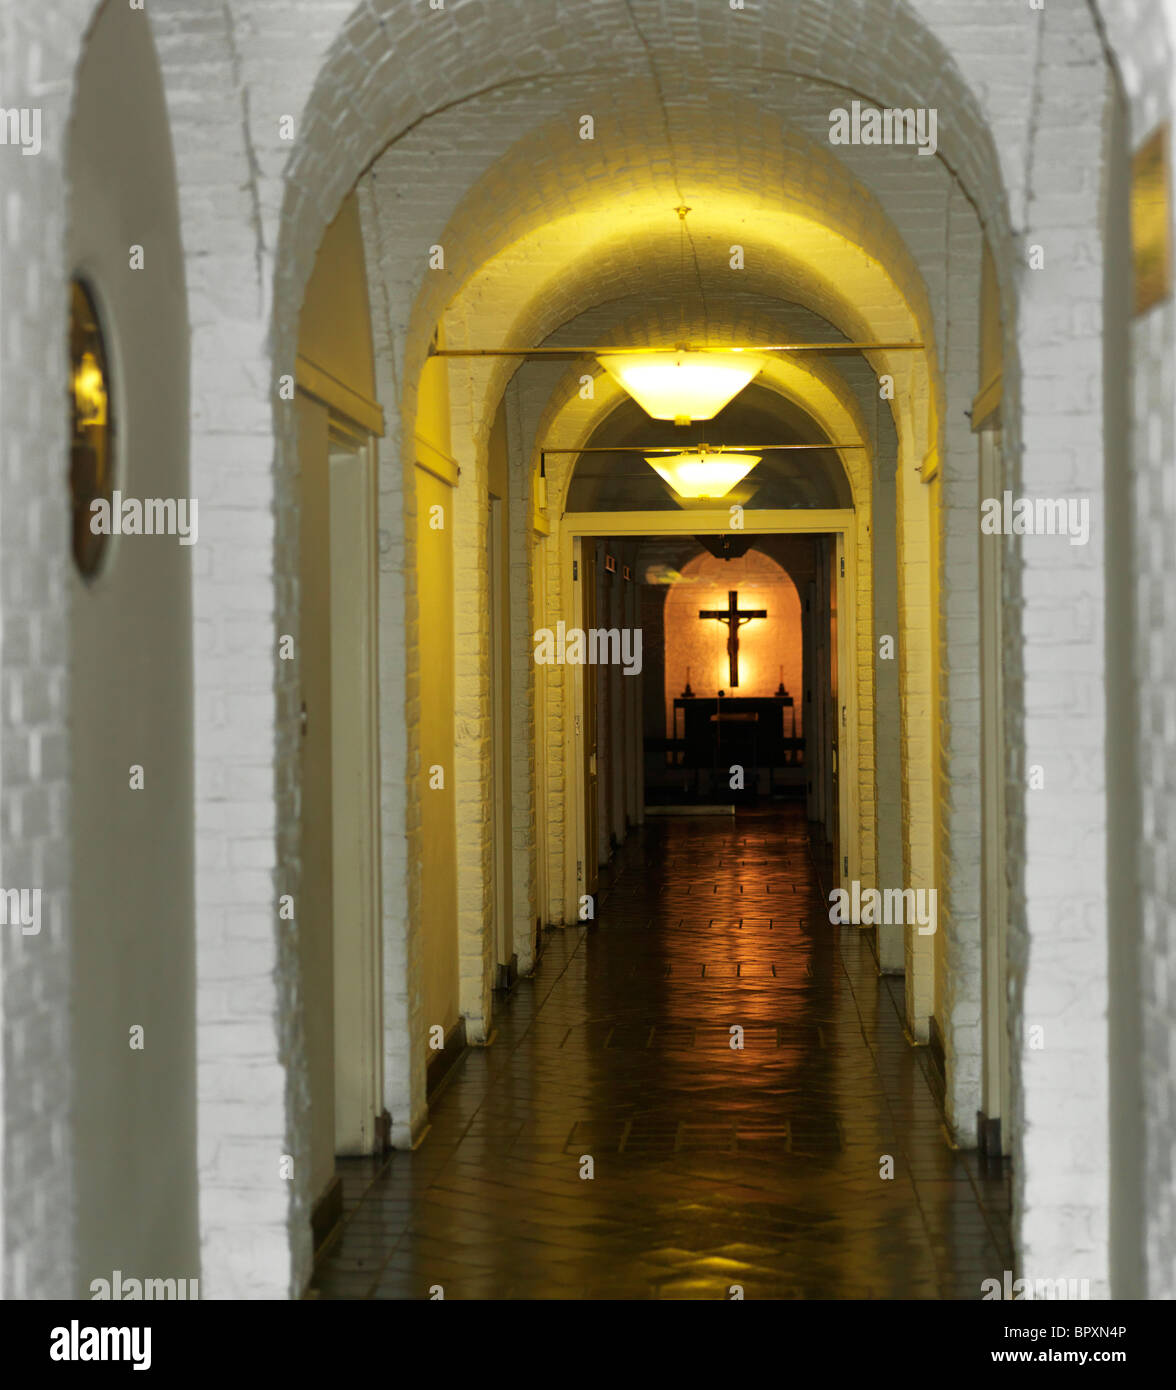 London England Corridor Leading From The Crypt And The Goose Cafe To St Marylebone Parish Church Stock Photo